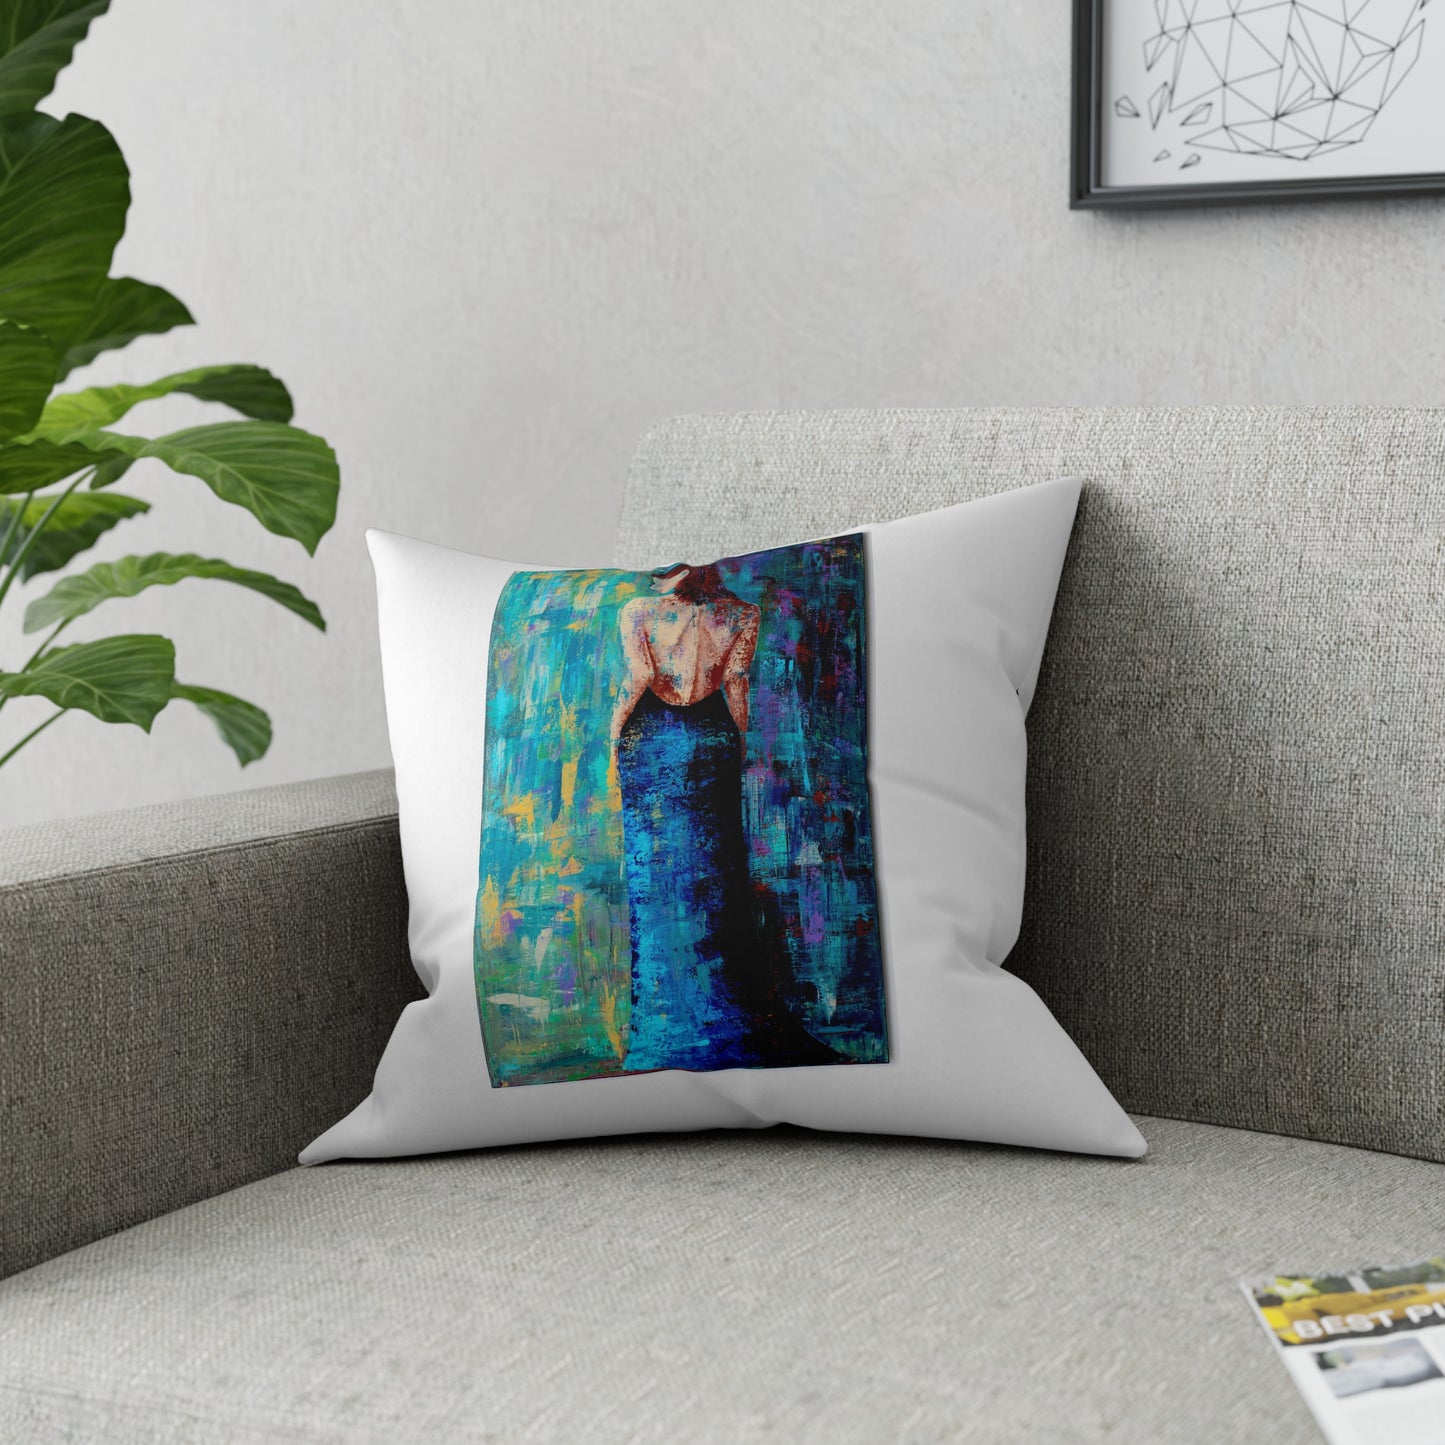 Decorative Pillow Lady in Blue -  White broadcloth with Poem